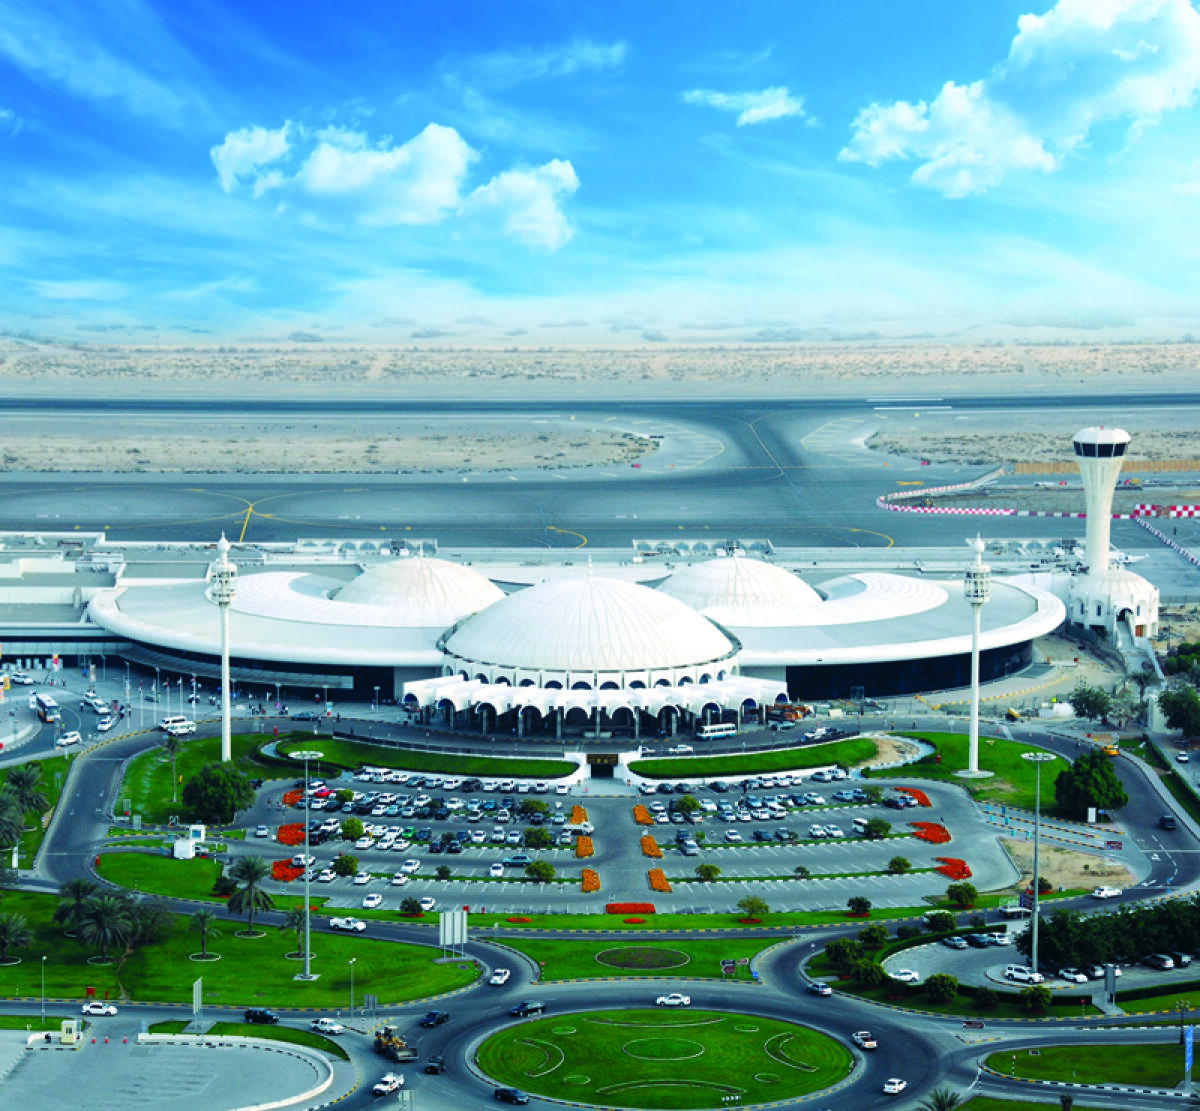 Last year, the Sharjah airport handled about 13.1 million passengers. — KT file